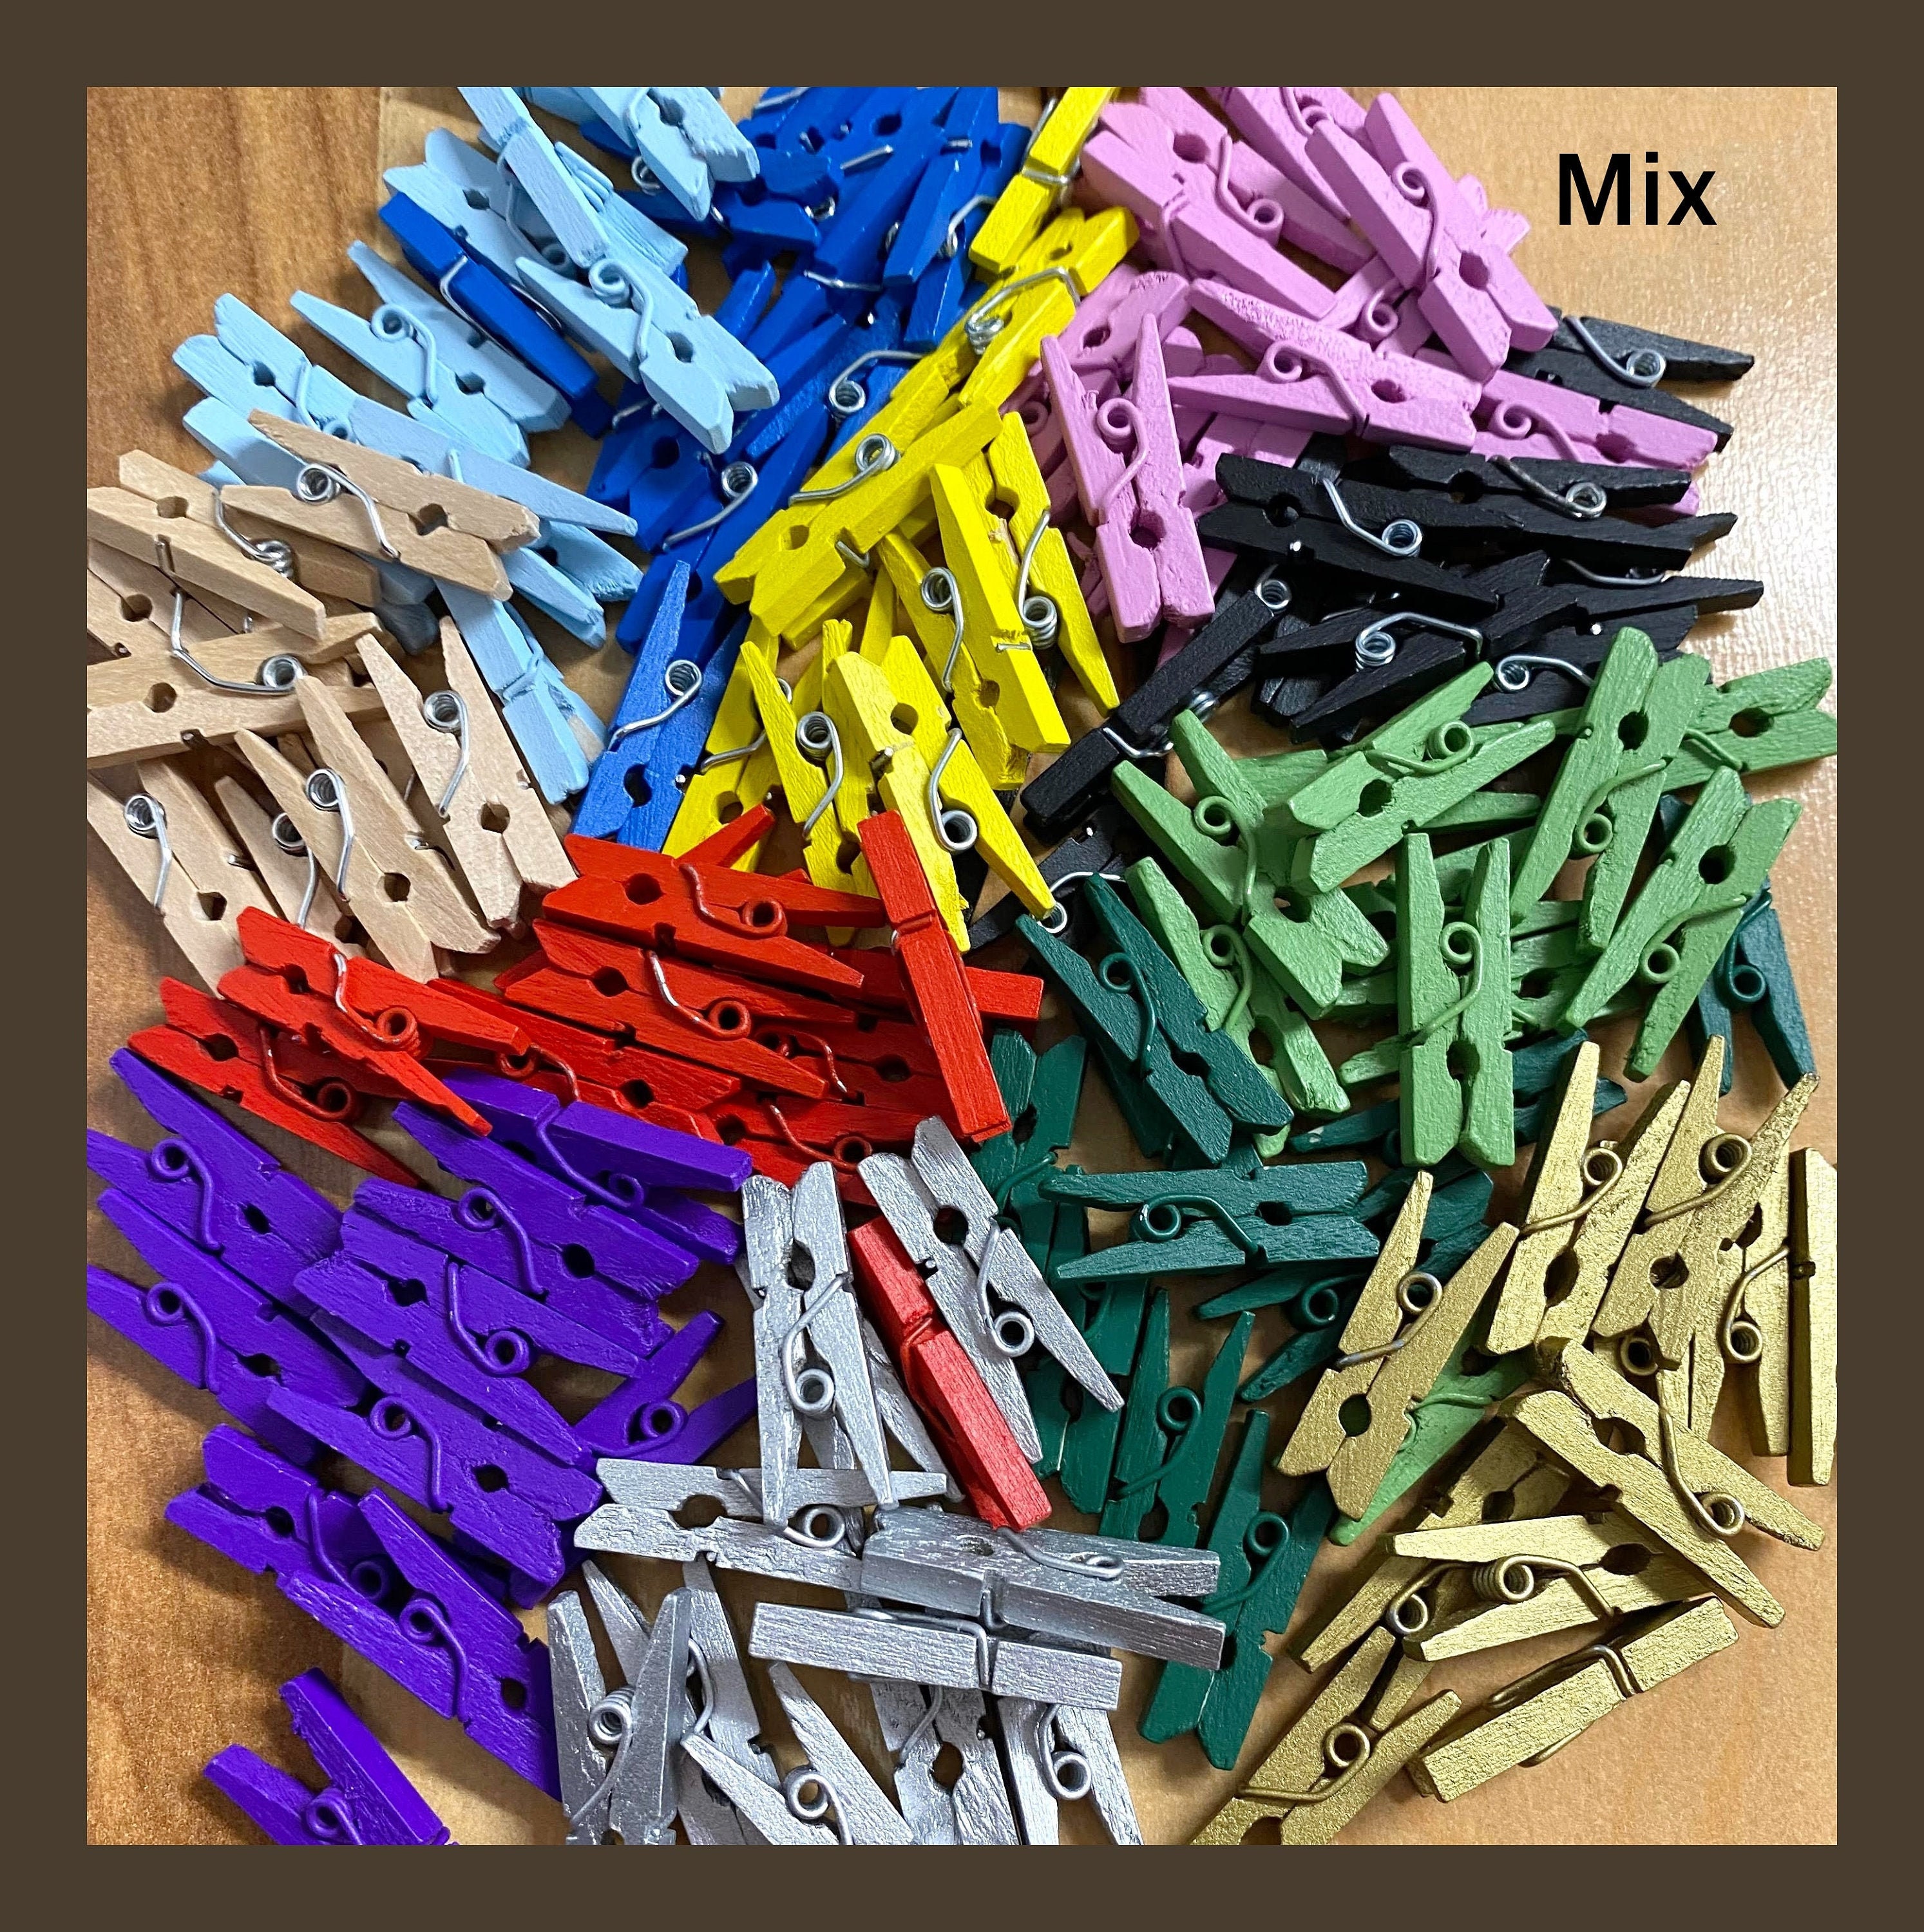 100-Pack Minipins | Miniature-Sized Rustic Wooden Clothespins for  Scrapbooking, Crafts, Decoratng and Organizing